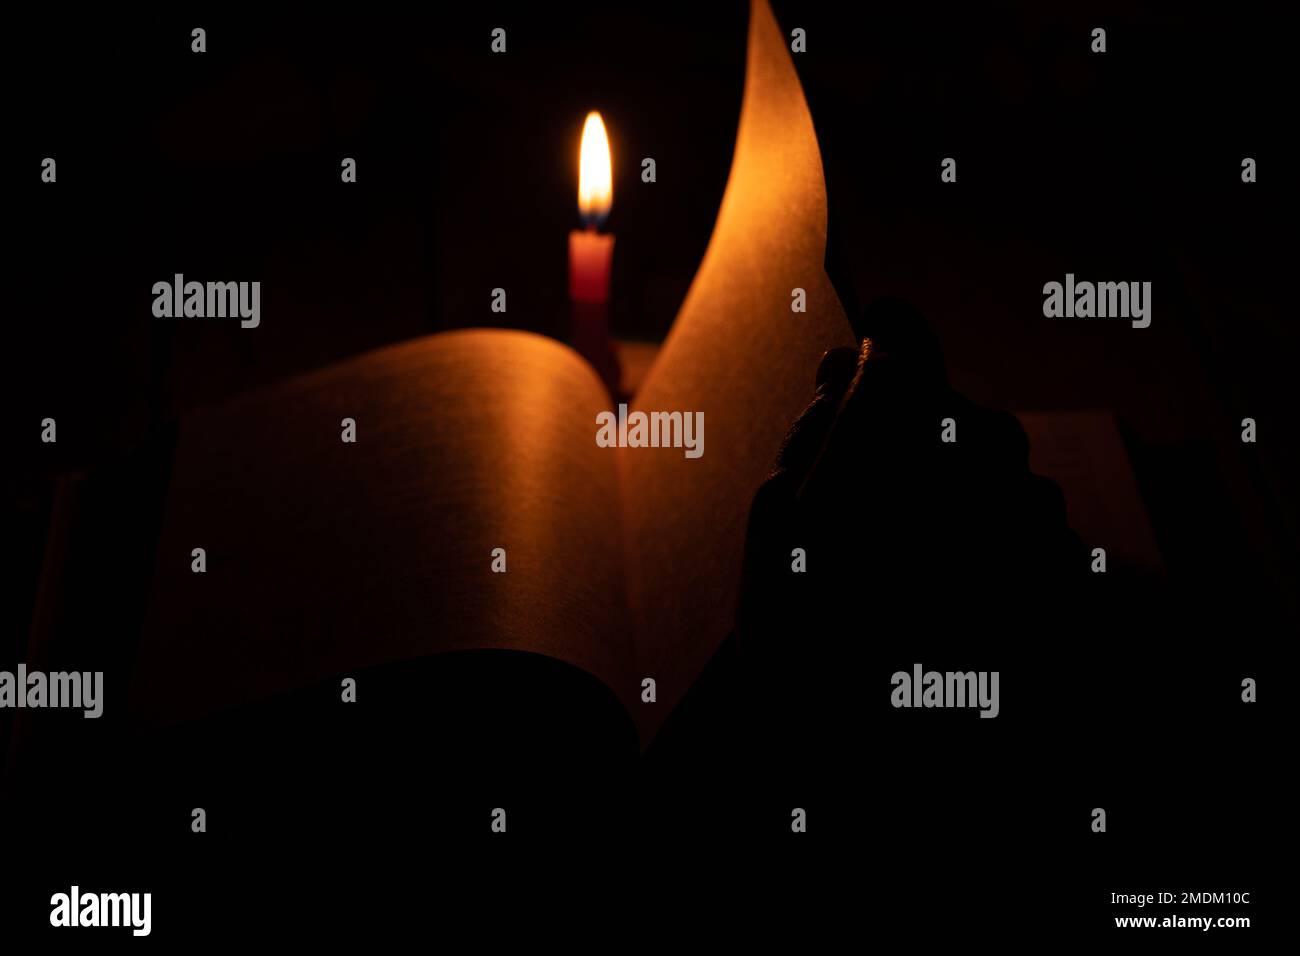 bible lies a candle flame of a candle in the dark, pray a bible, hands on a book and a candle flame at night, religion Stock Photo